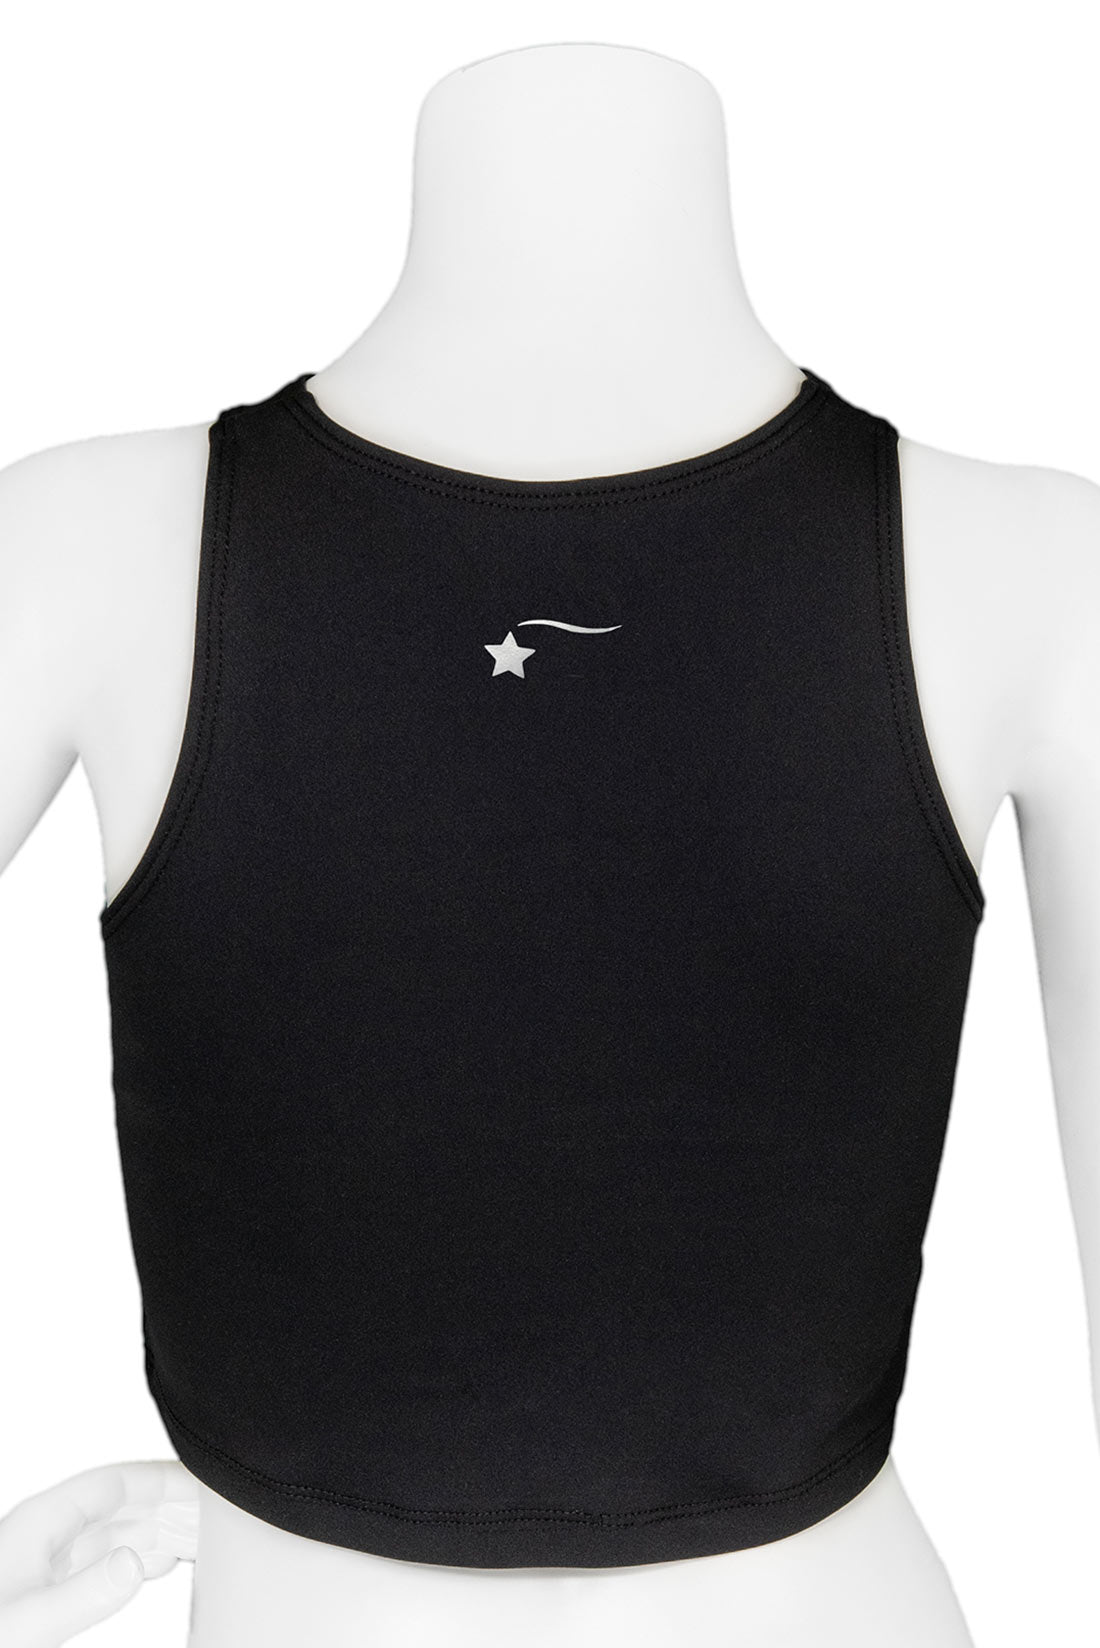 Black tank top for sports by Destira, 2024